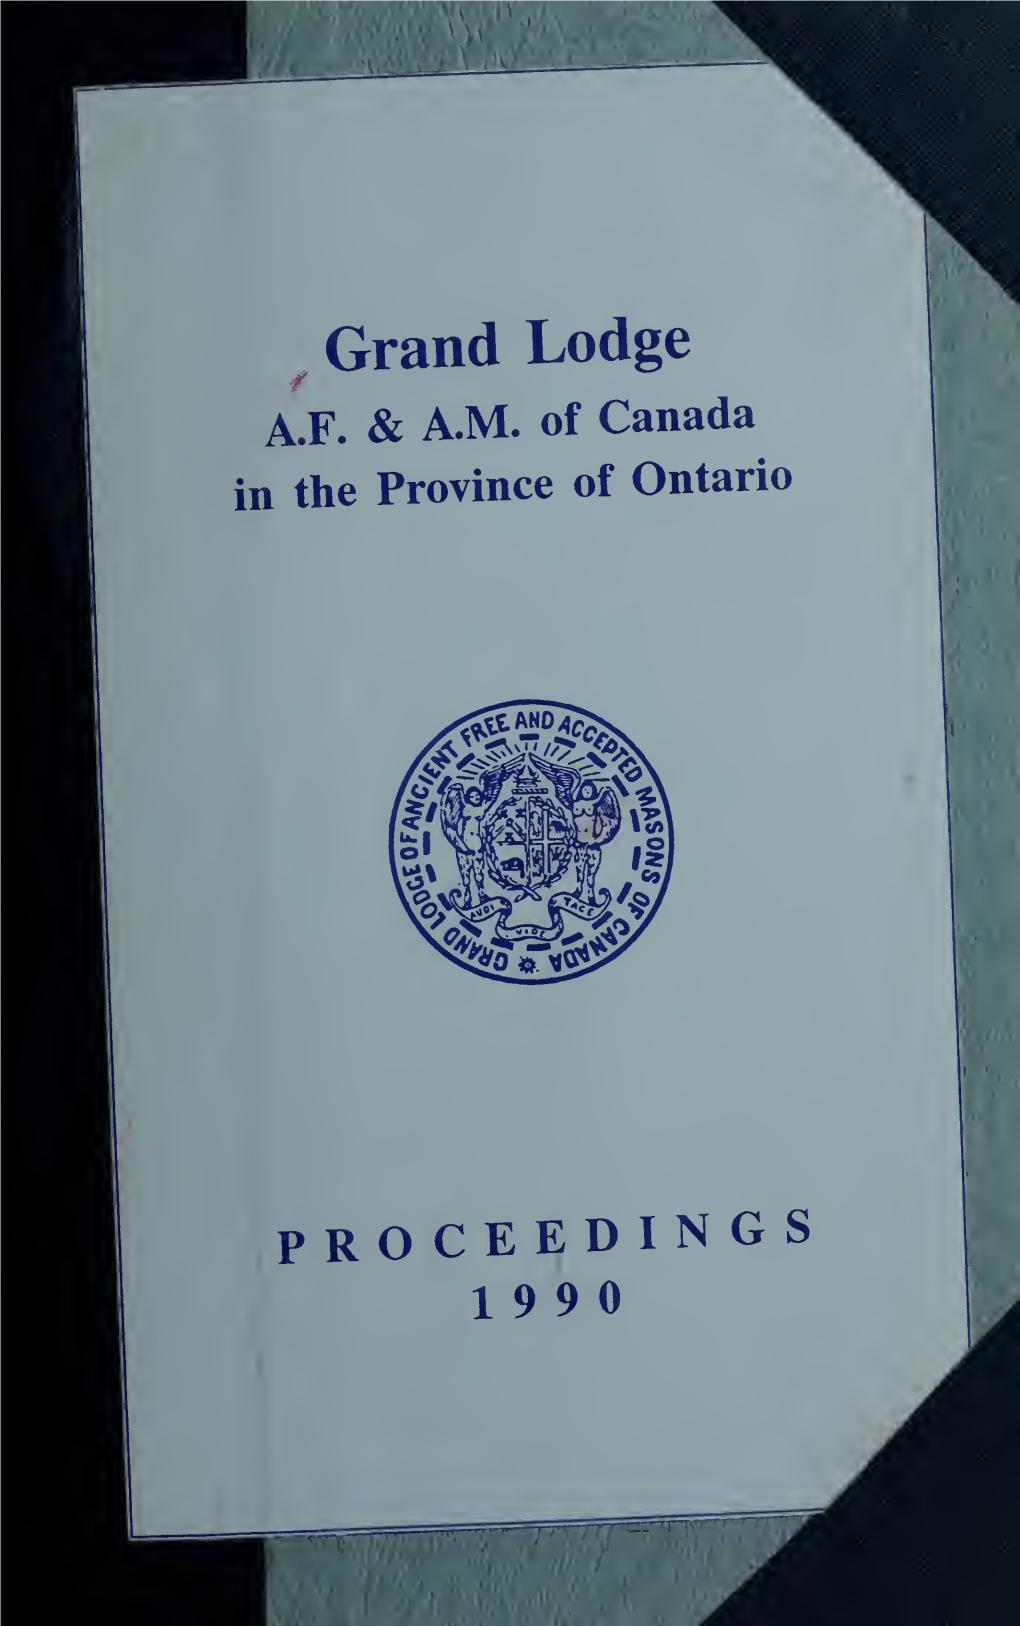 Grand Lodge of AF & AM of Canada, 1990